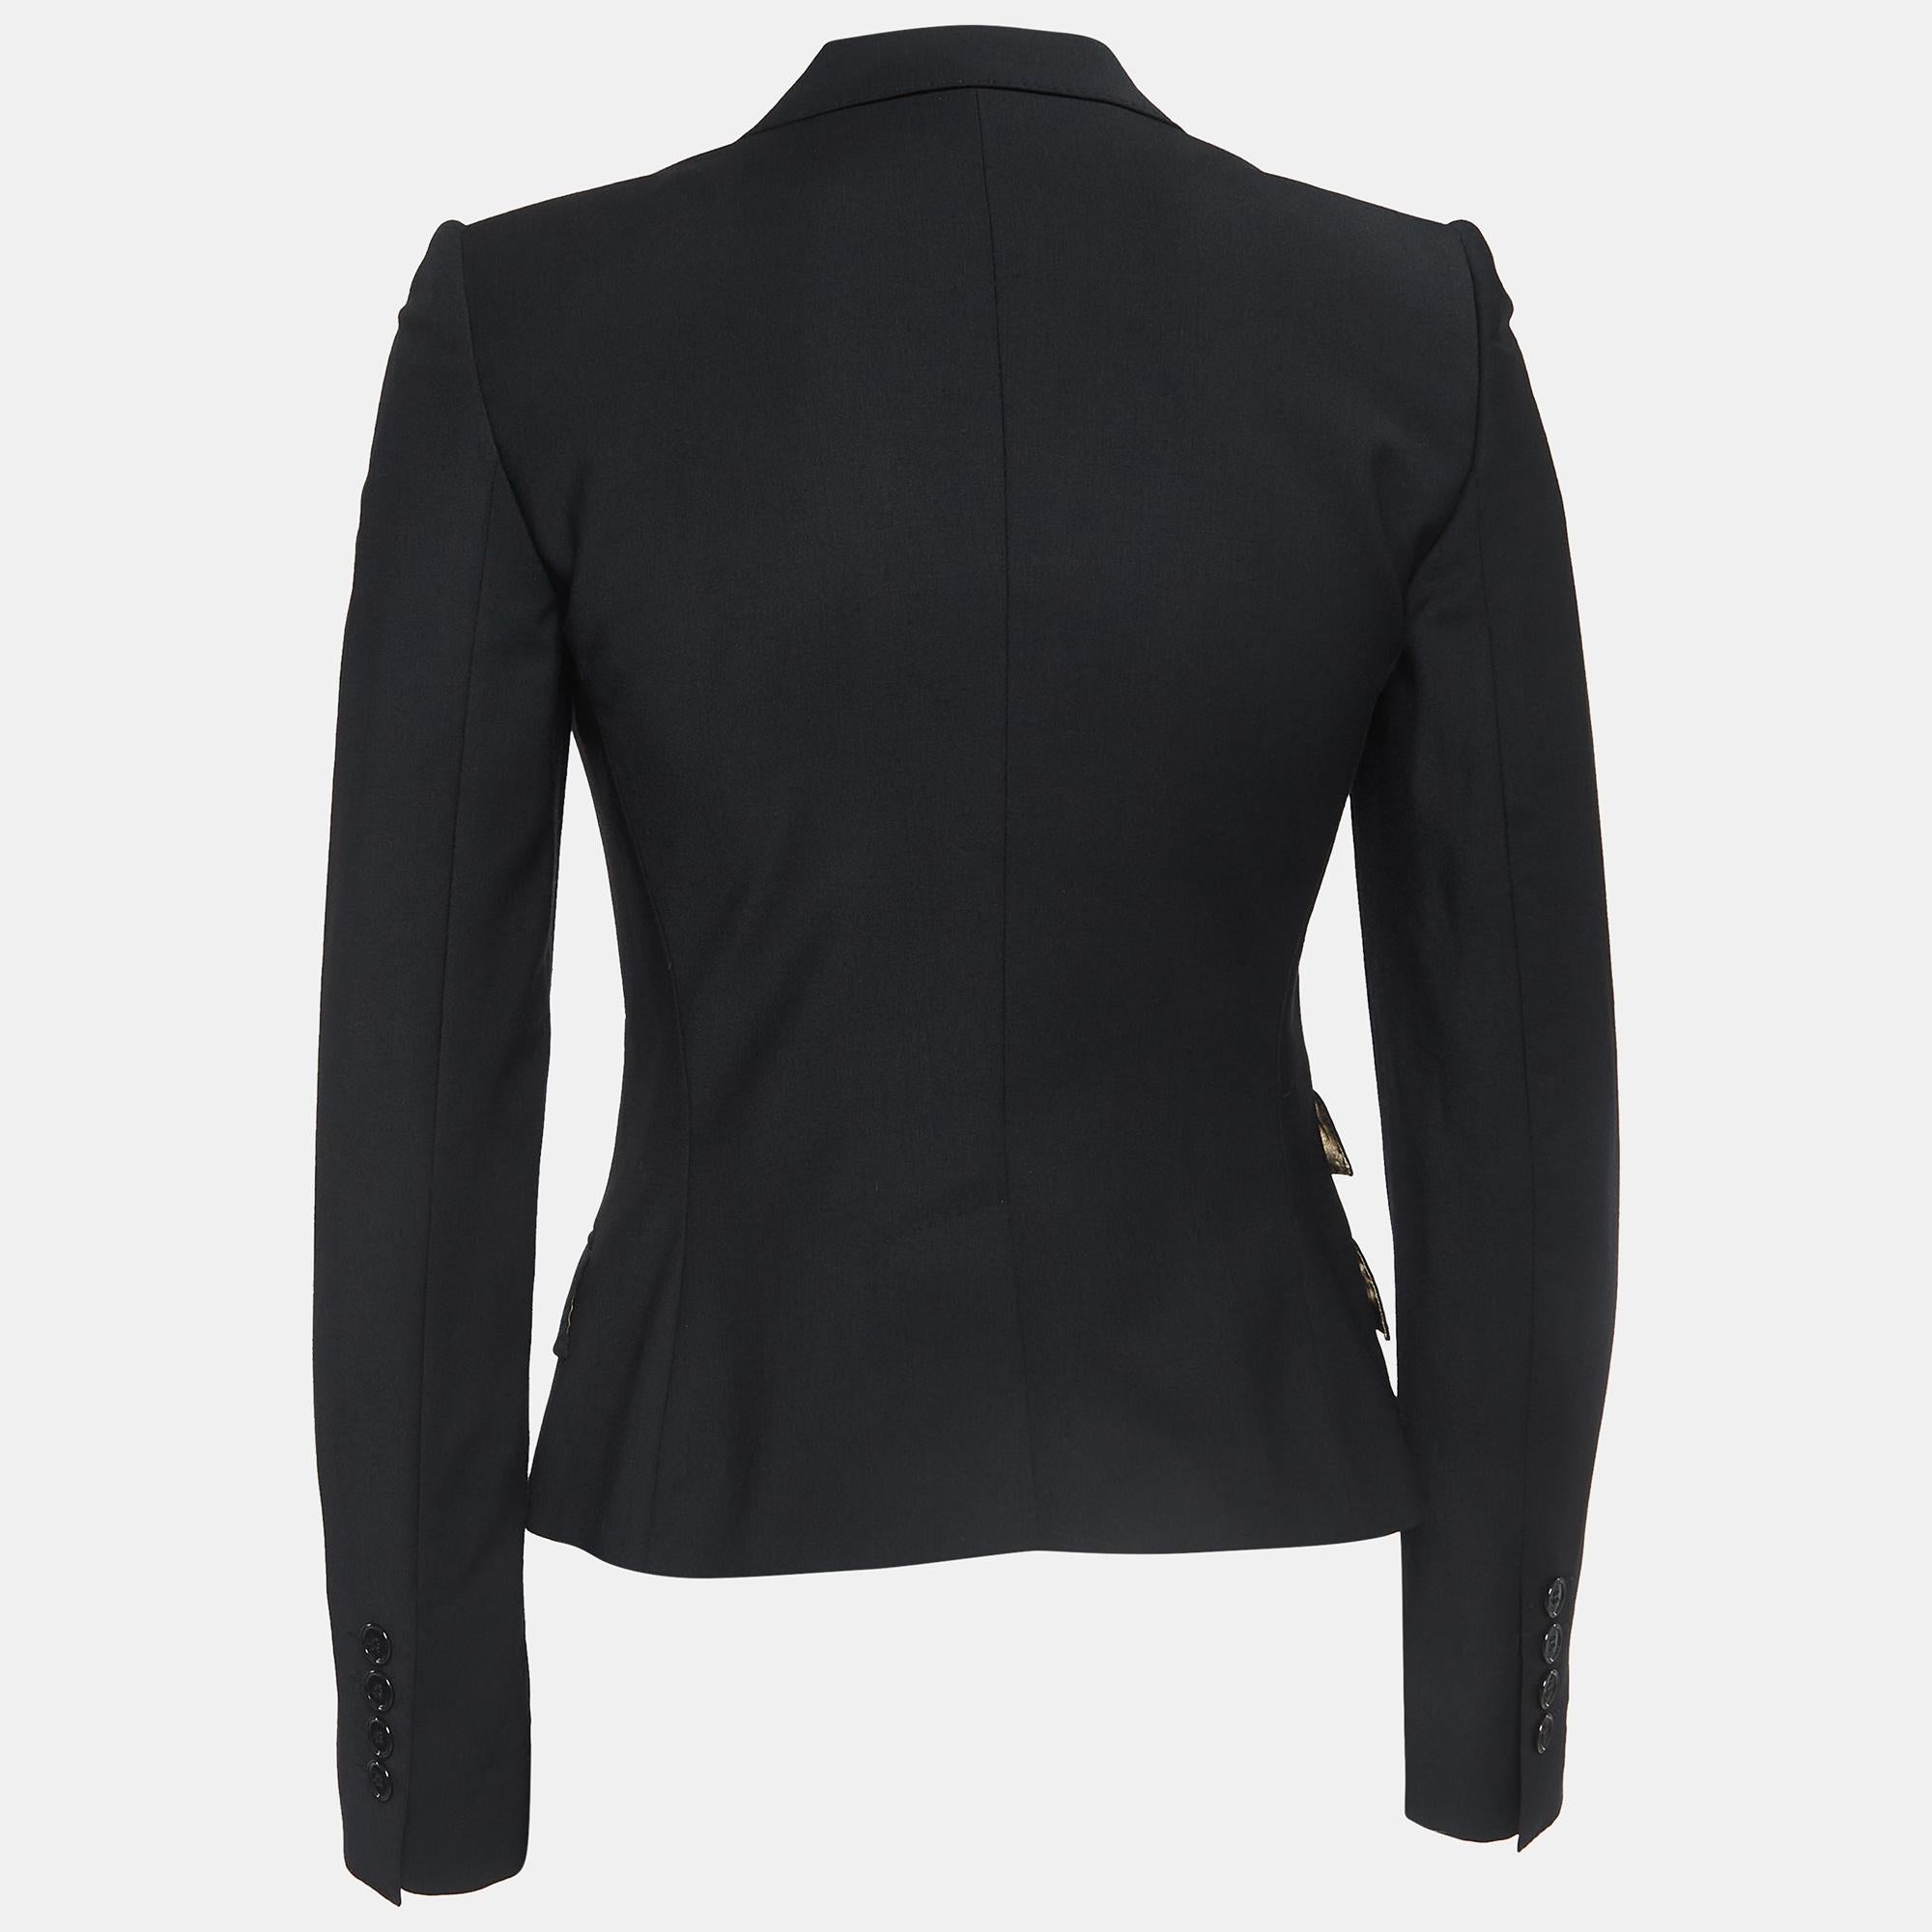 \This blazer brings you both class and luxury as you wear it. It is highlighted with long sleeves and classic details, thus granting a polished, formal finish.

